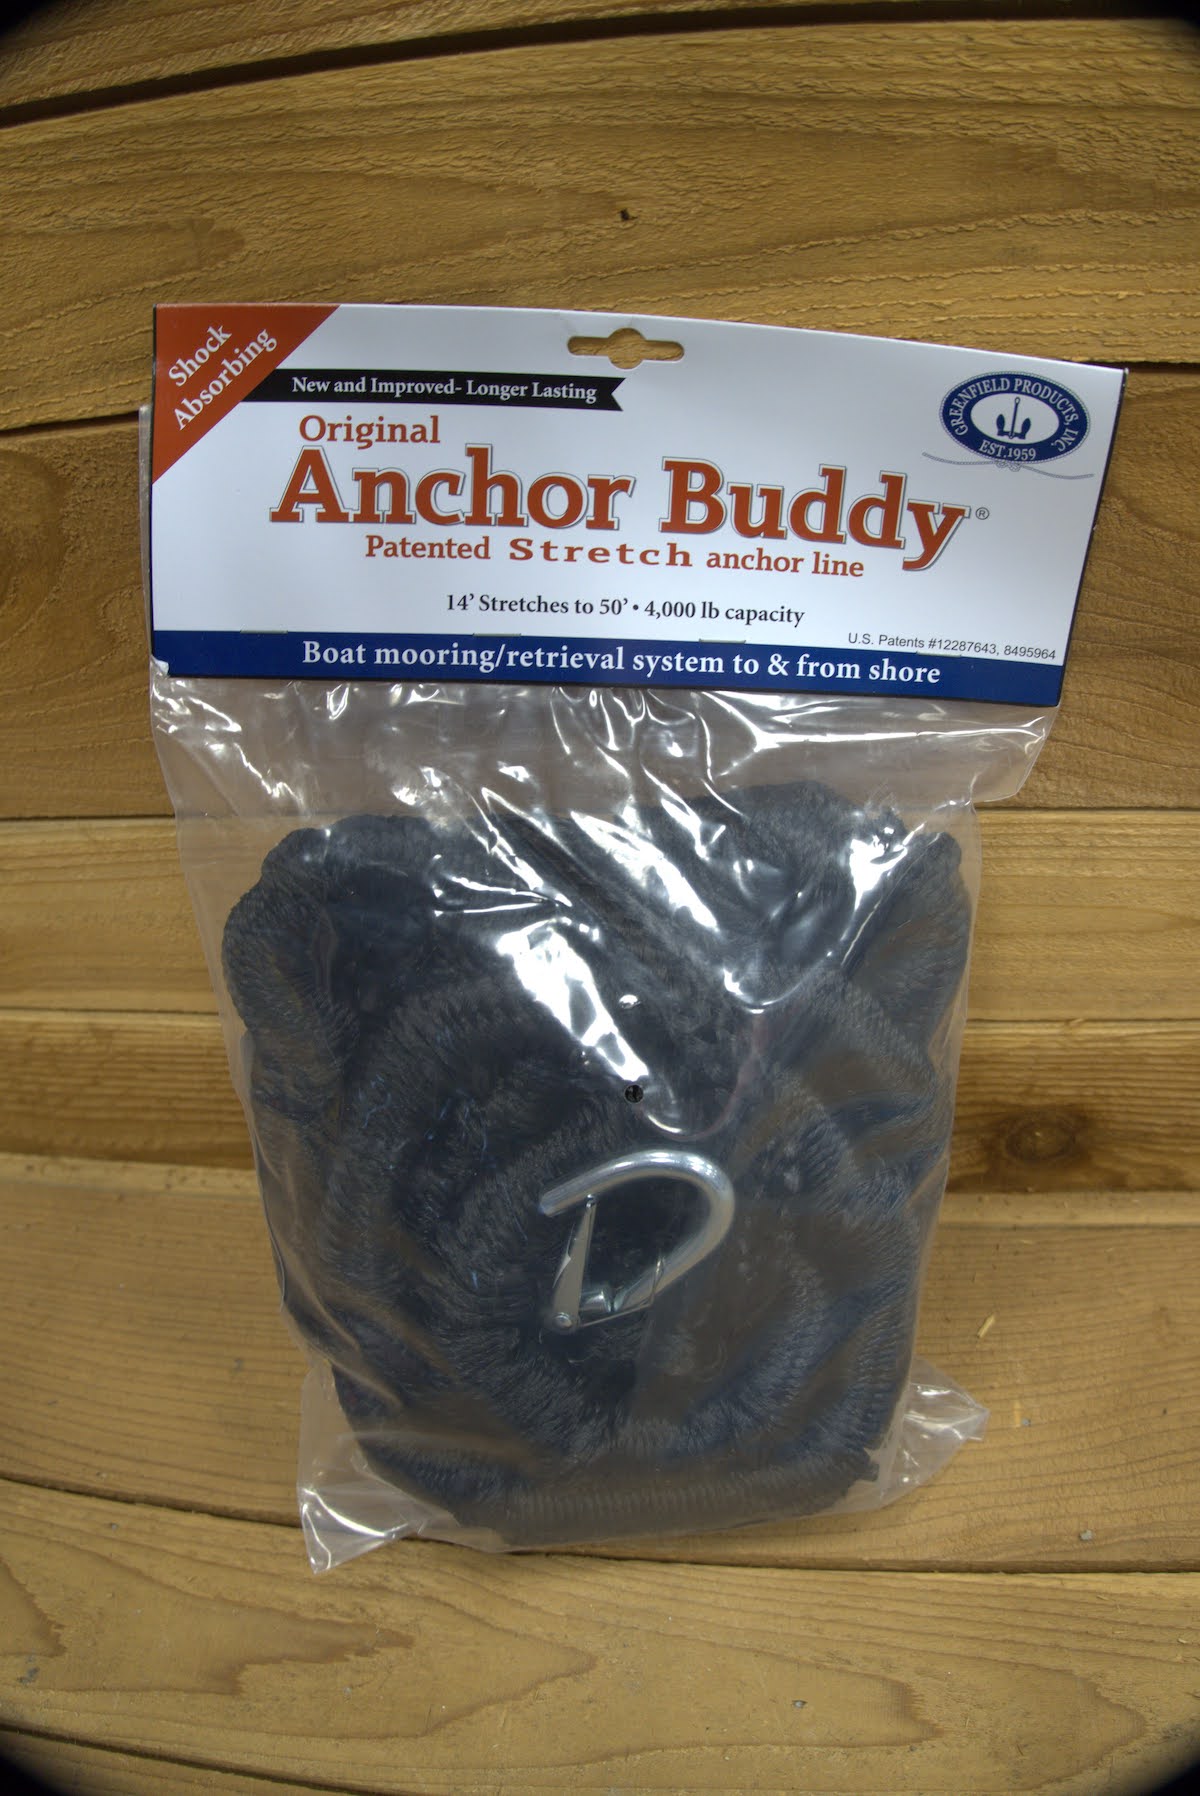 Anchor Buddy Shallow Stretchable Anchor Line Stretches 7-21Ft